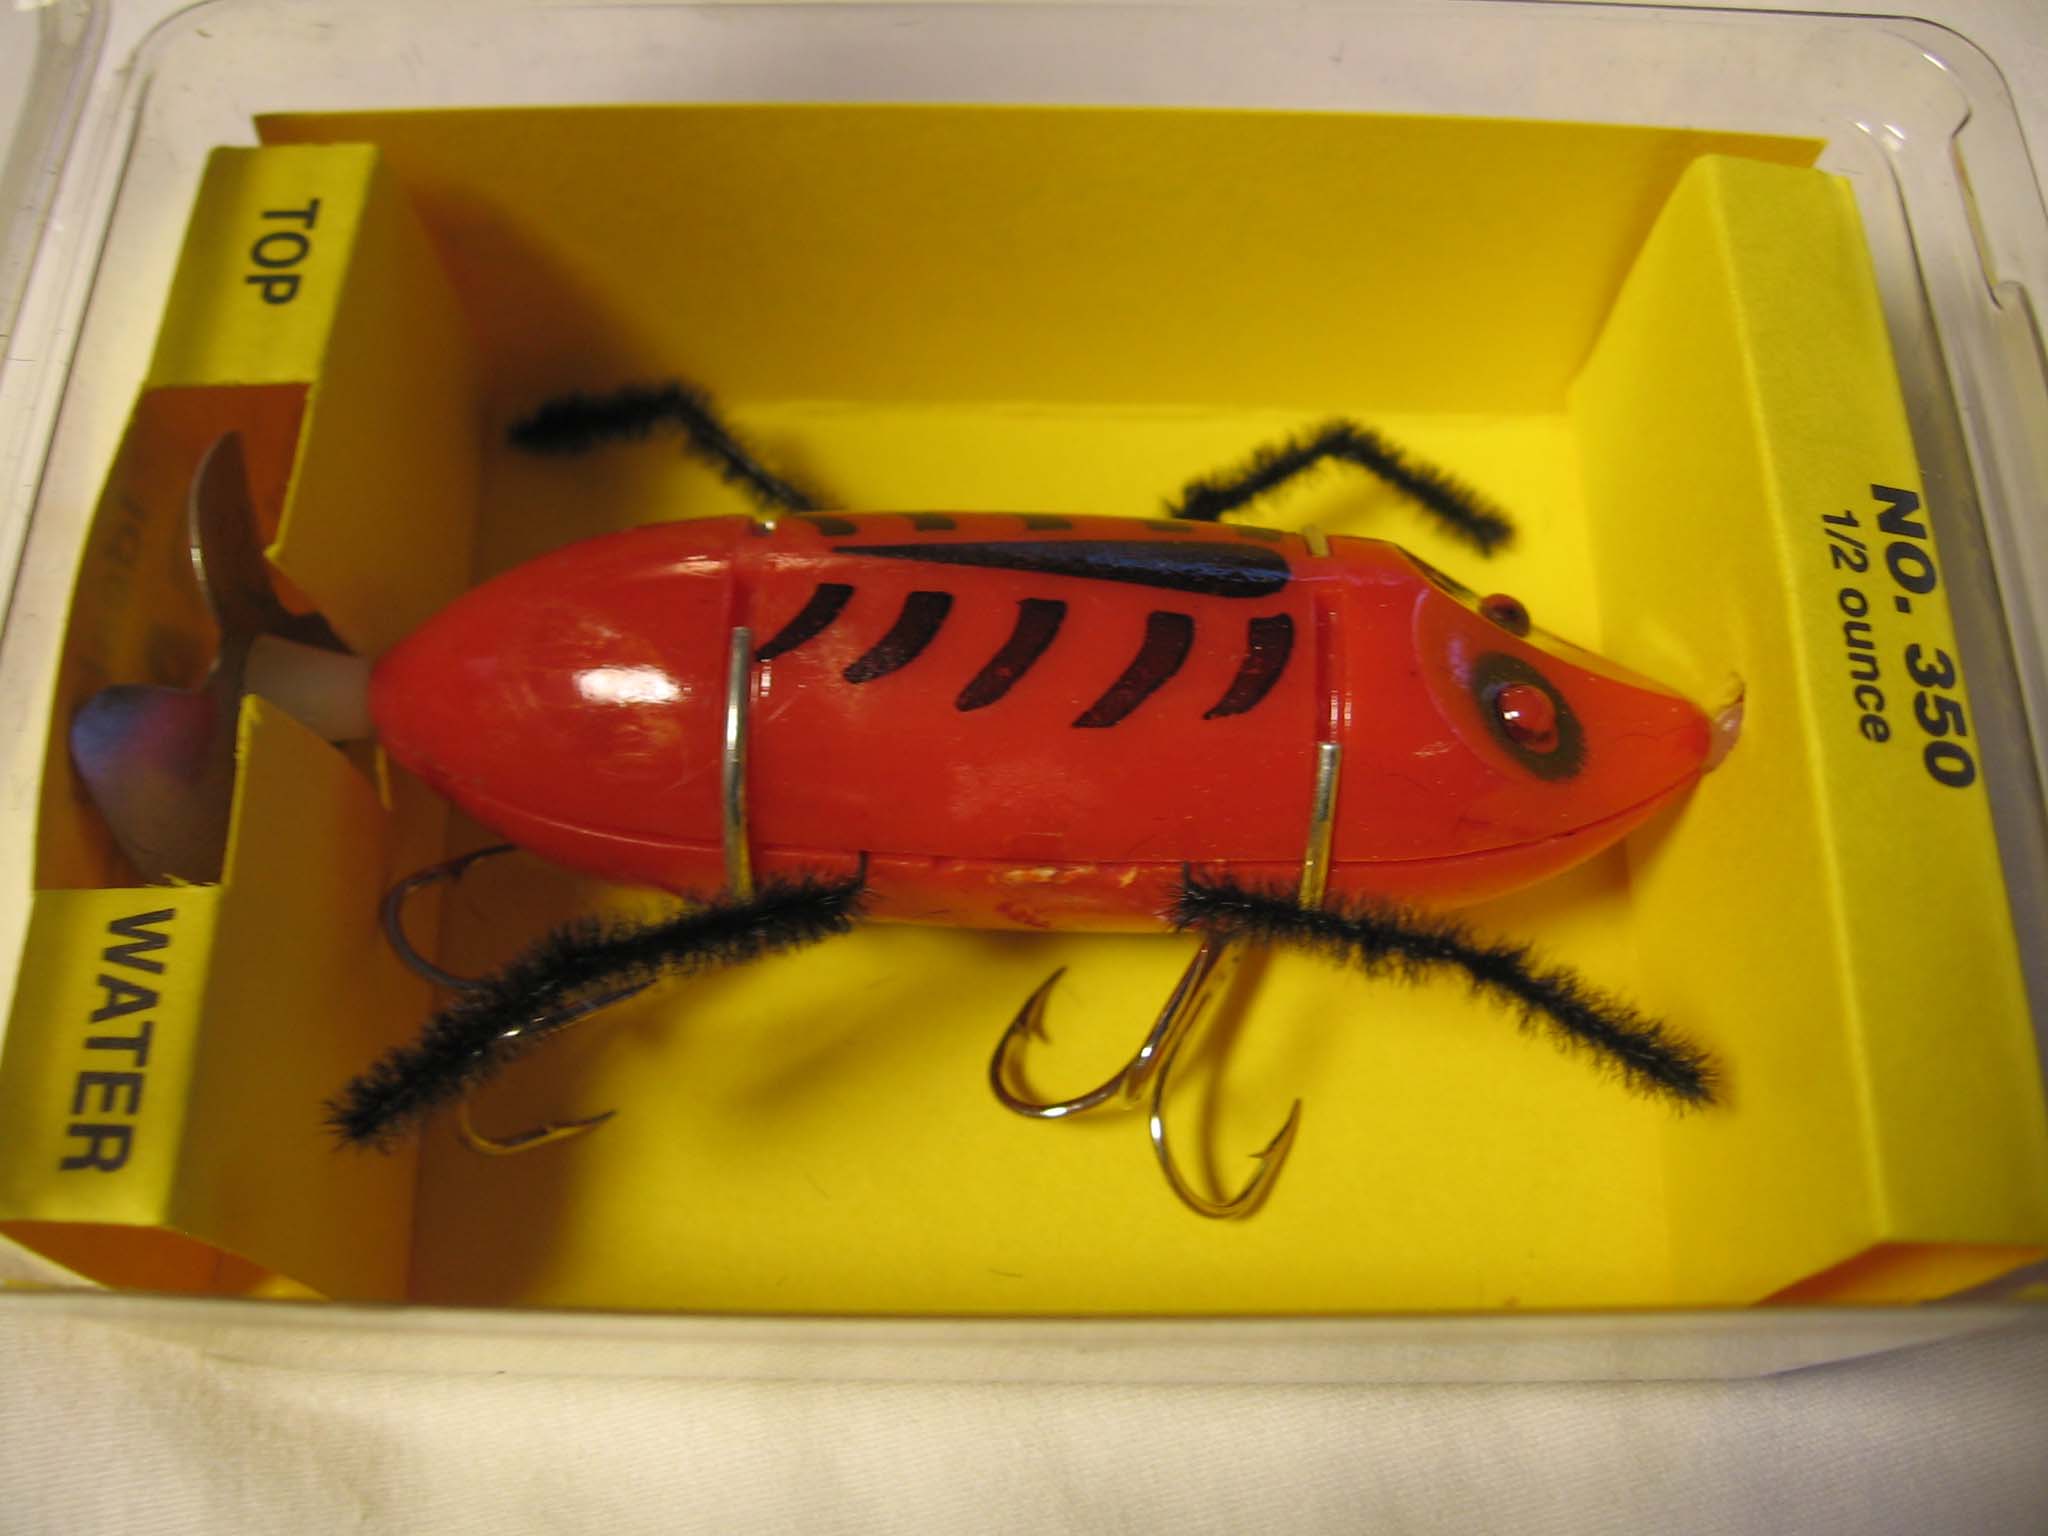 Crazy Legs #350 Top Water Bass Fishing Lure